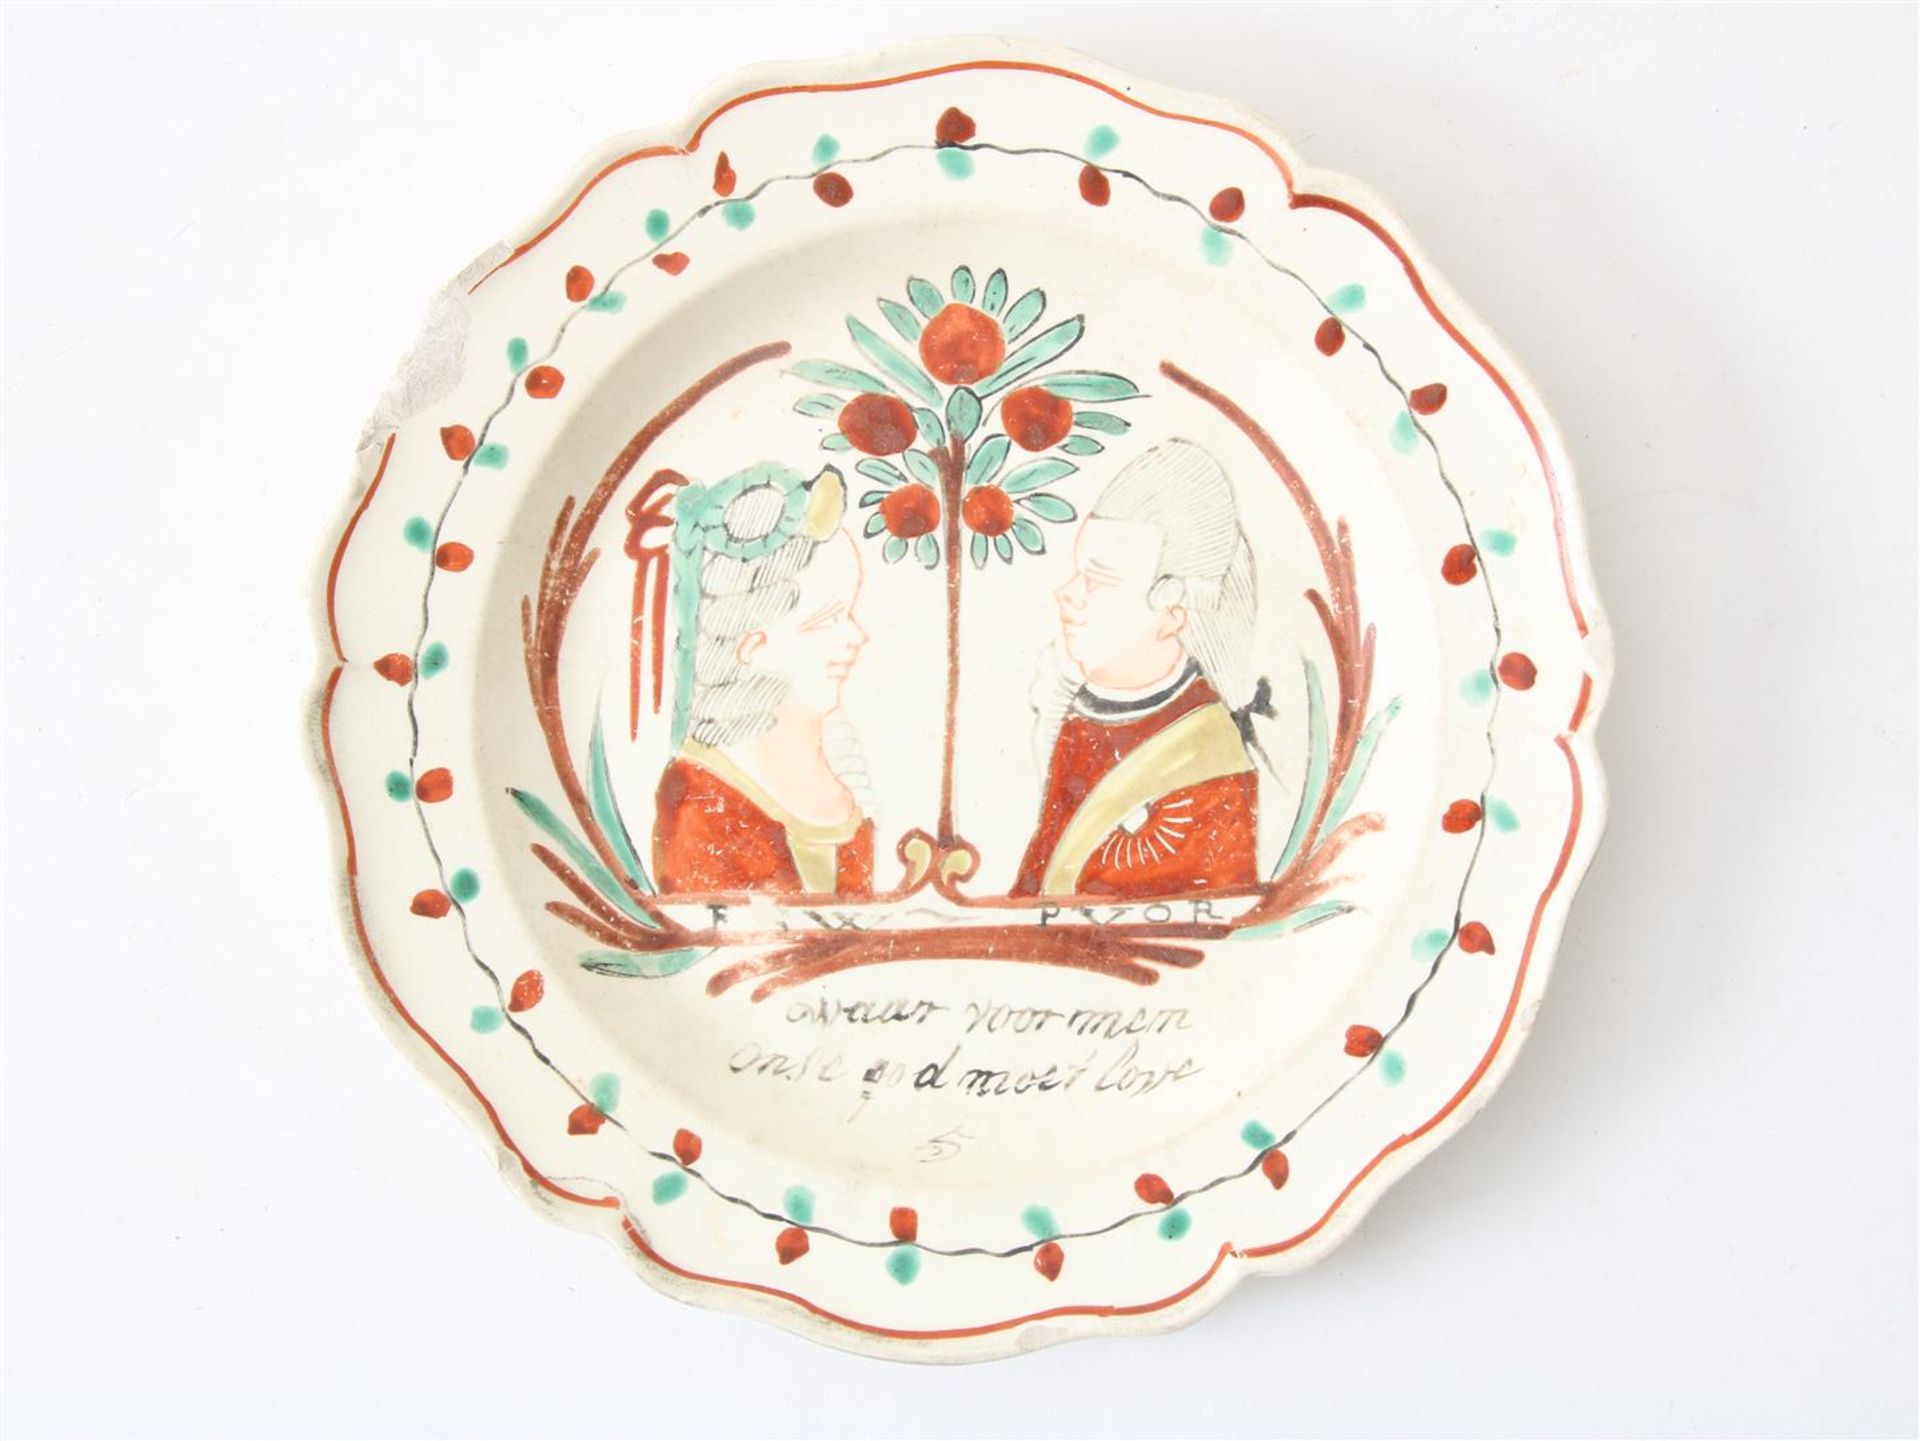 Lot consisting of: plate with polychrome floral decor and text in two hearts: "There is nothing - Image 2 of 7